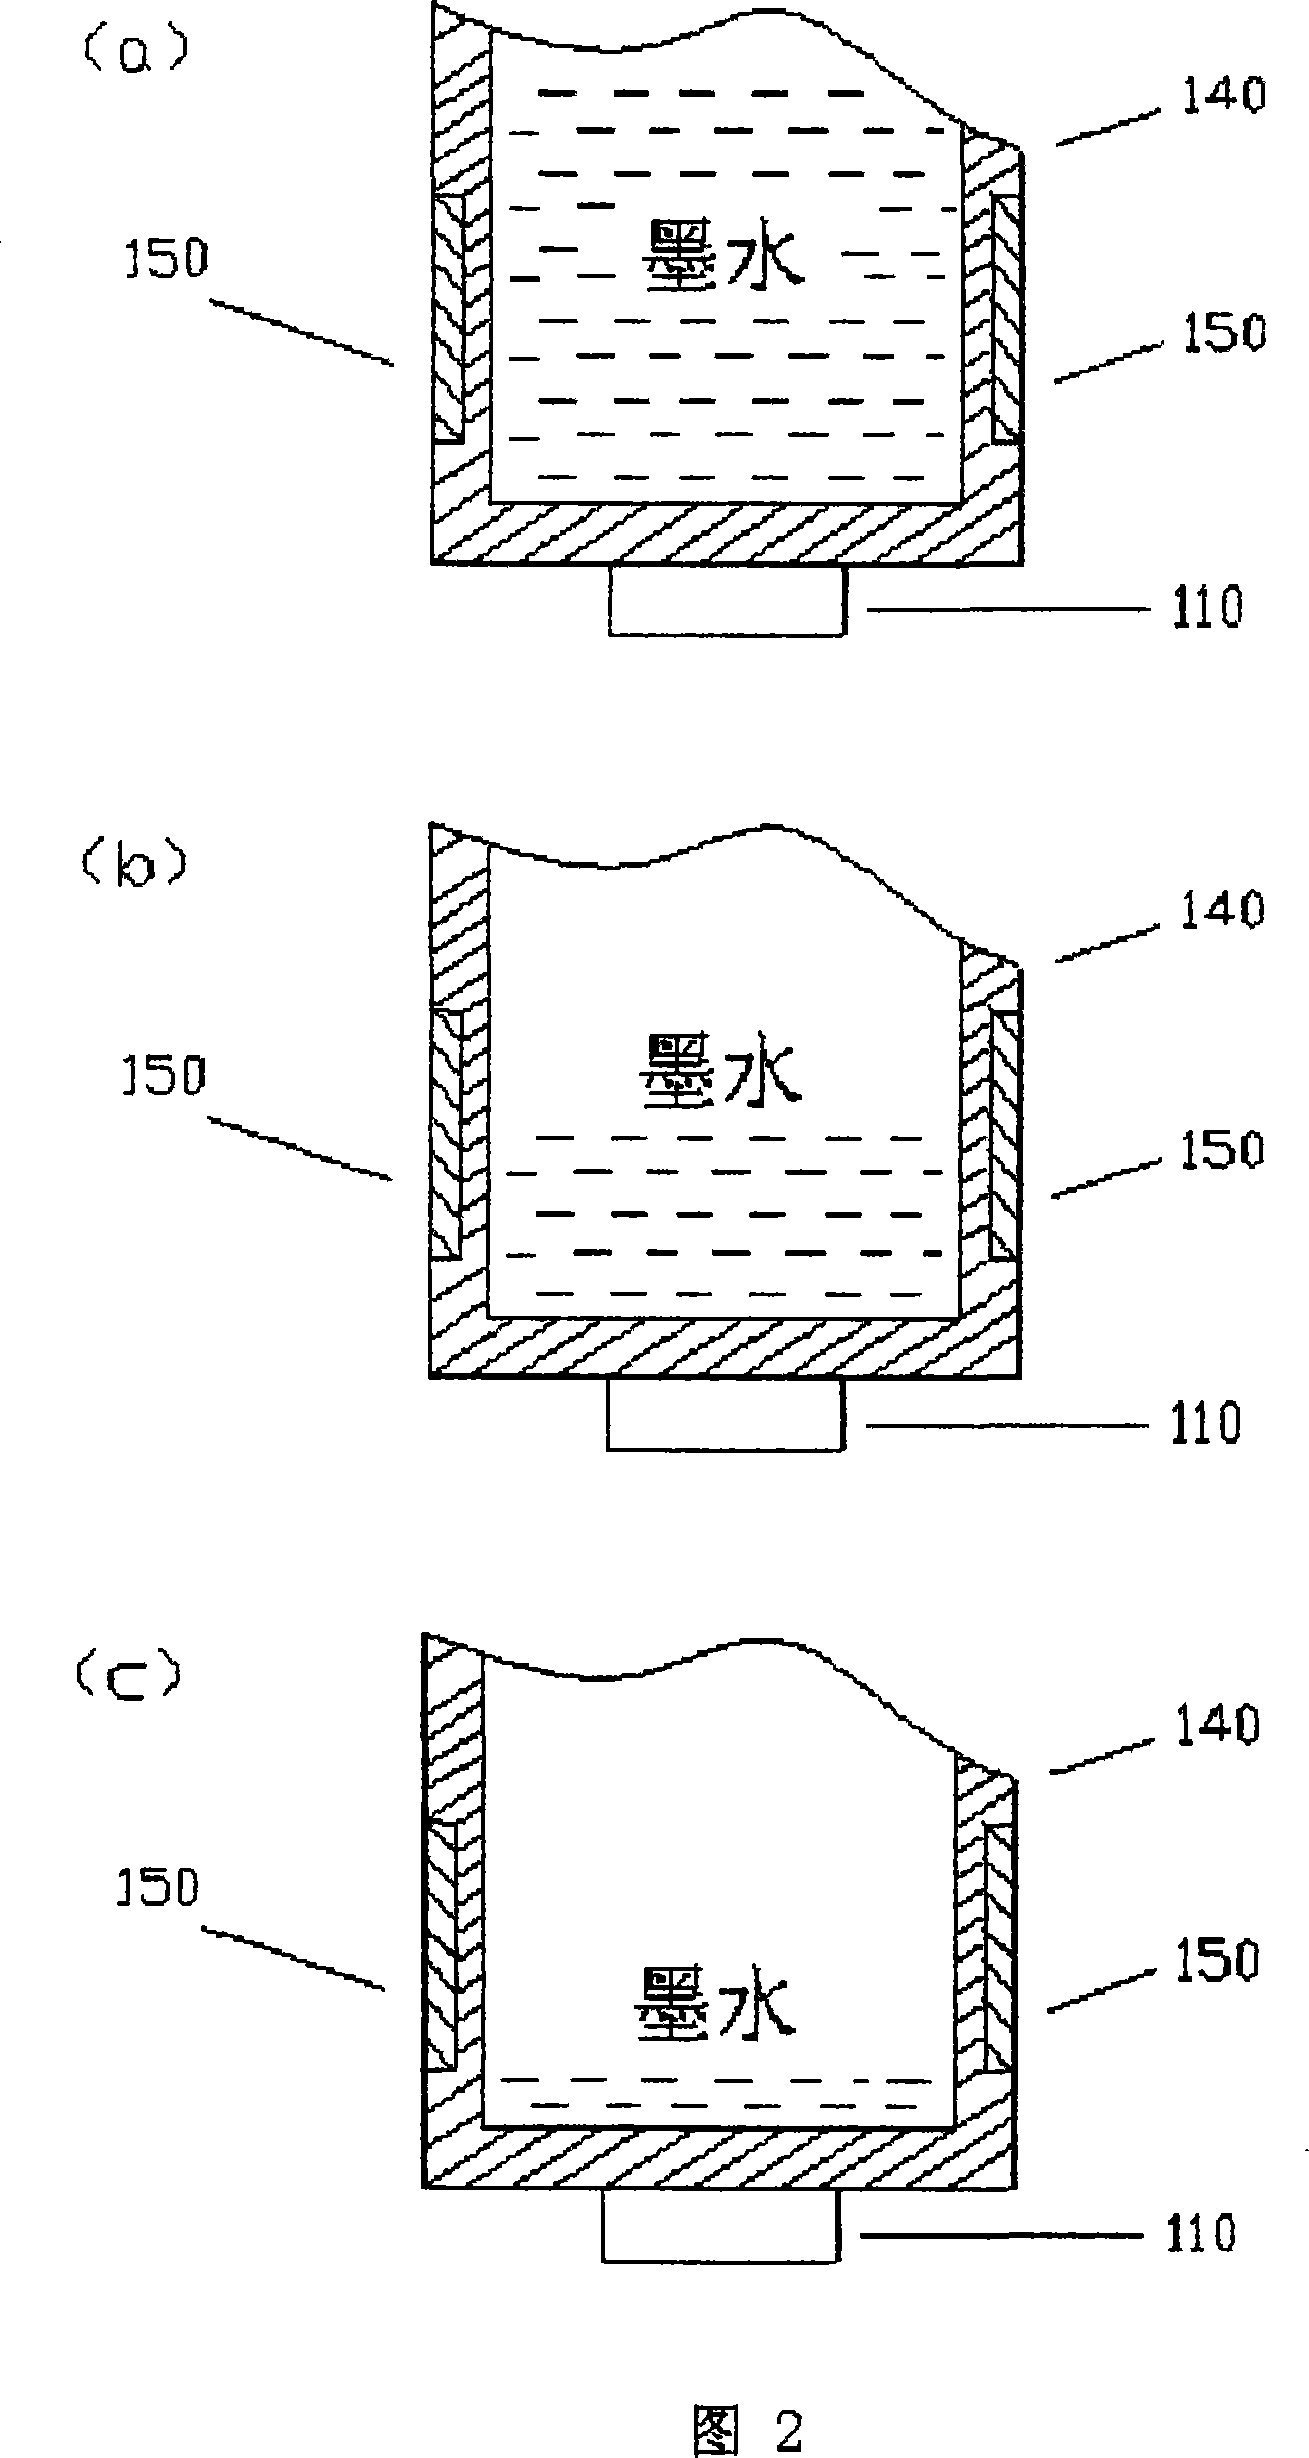 Consumable container with circuit for measuring consumable surplus